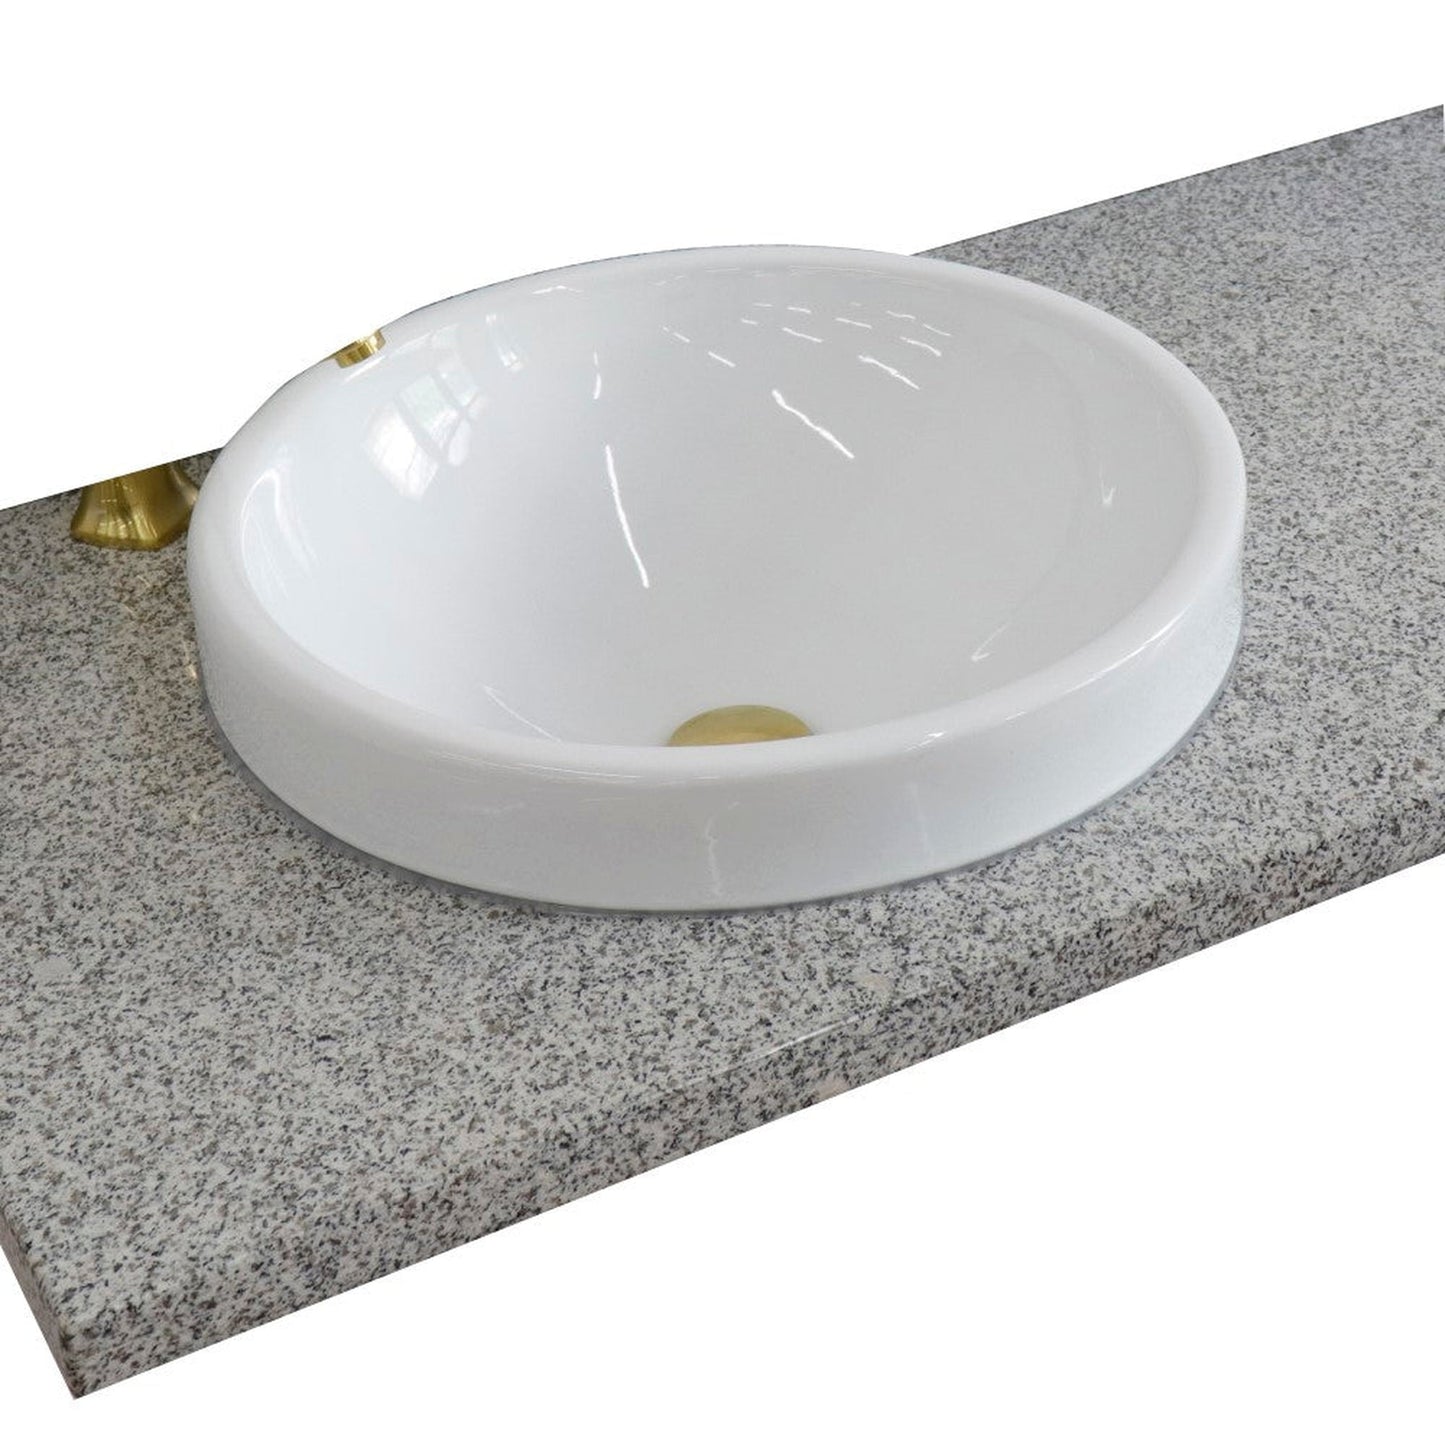 Bellaterra Home 43" x 22" Gray Granite Vanity Top With Left Offset Semi-recessed Round Sink and Overflow